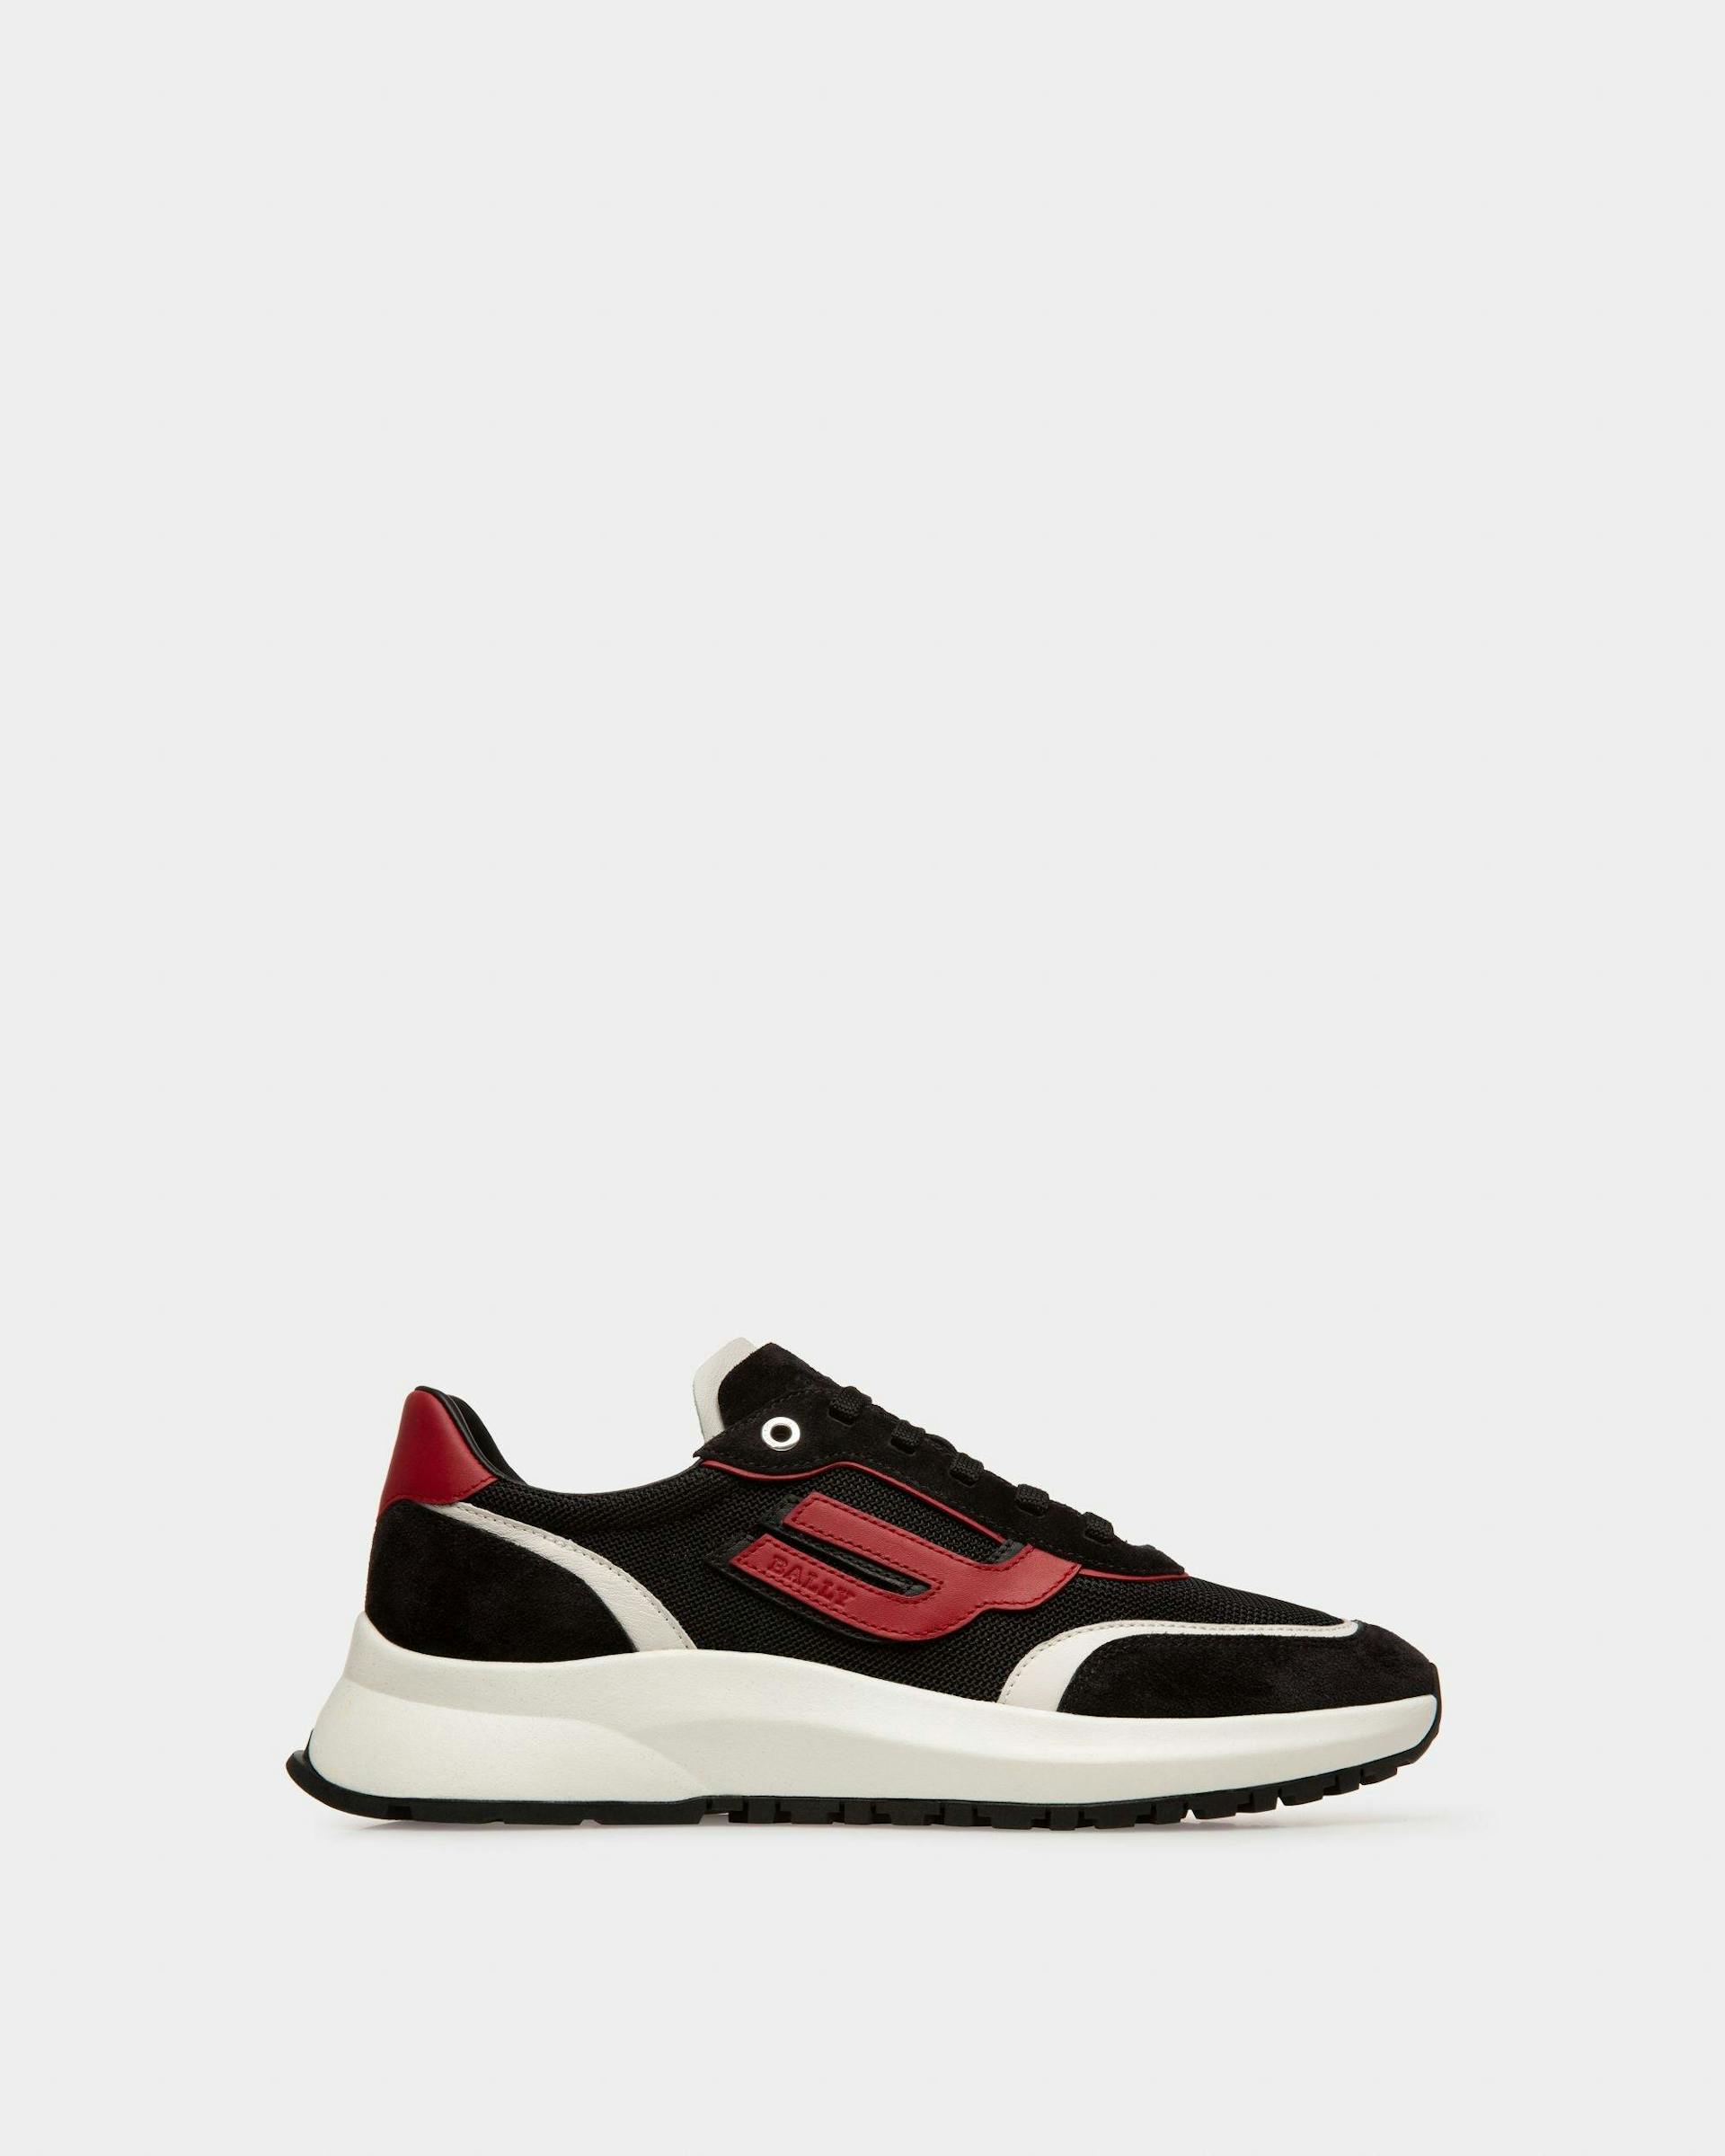 Demmy | Men'S Sneakers | Black, White And Red Mesh And Leather | Bally